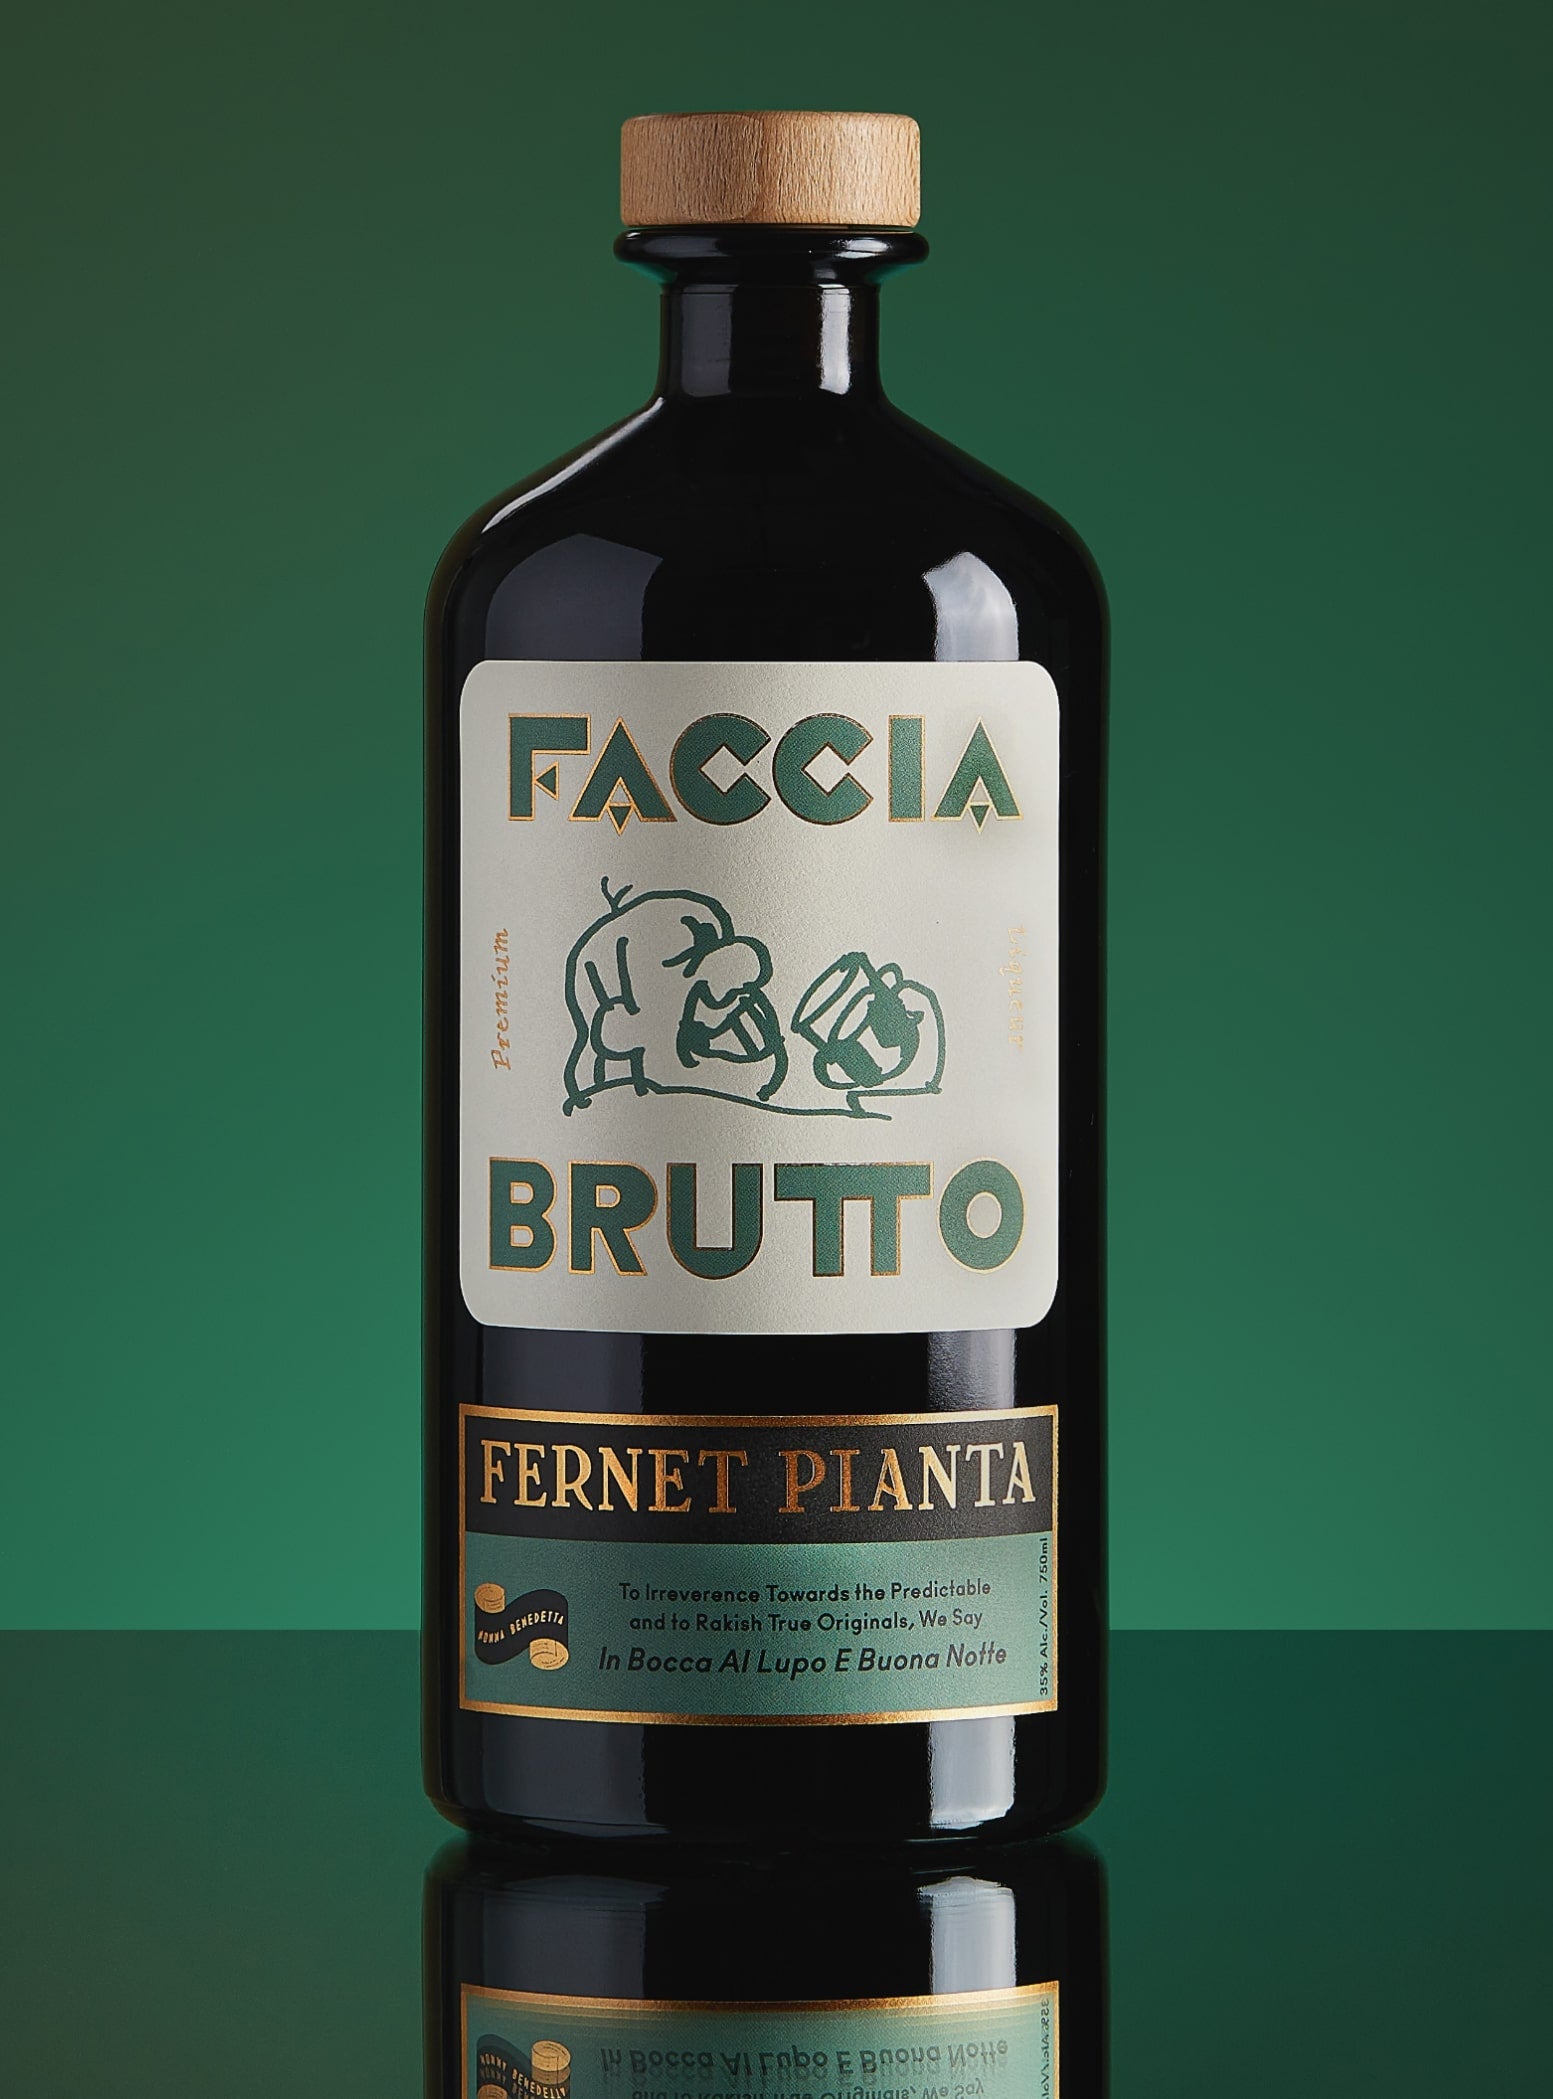 Bar cart with two cocktails, stirrer and bottle of Faccia Brutto Fernet Pianta